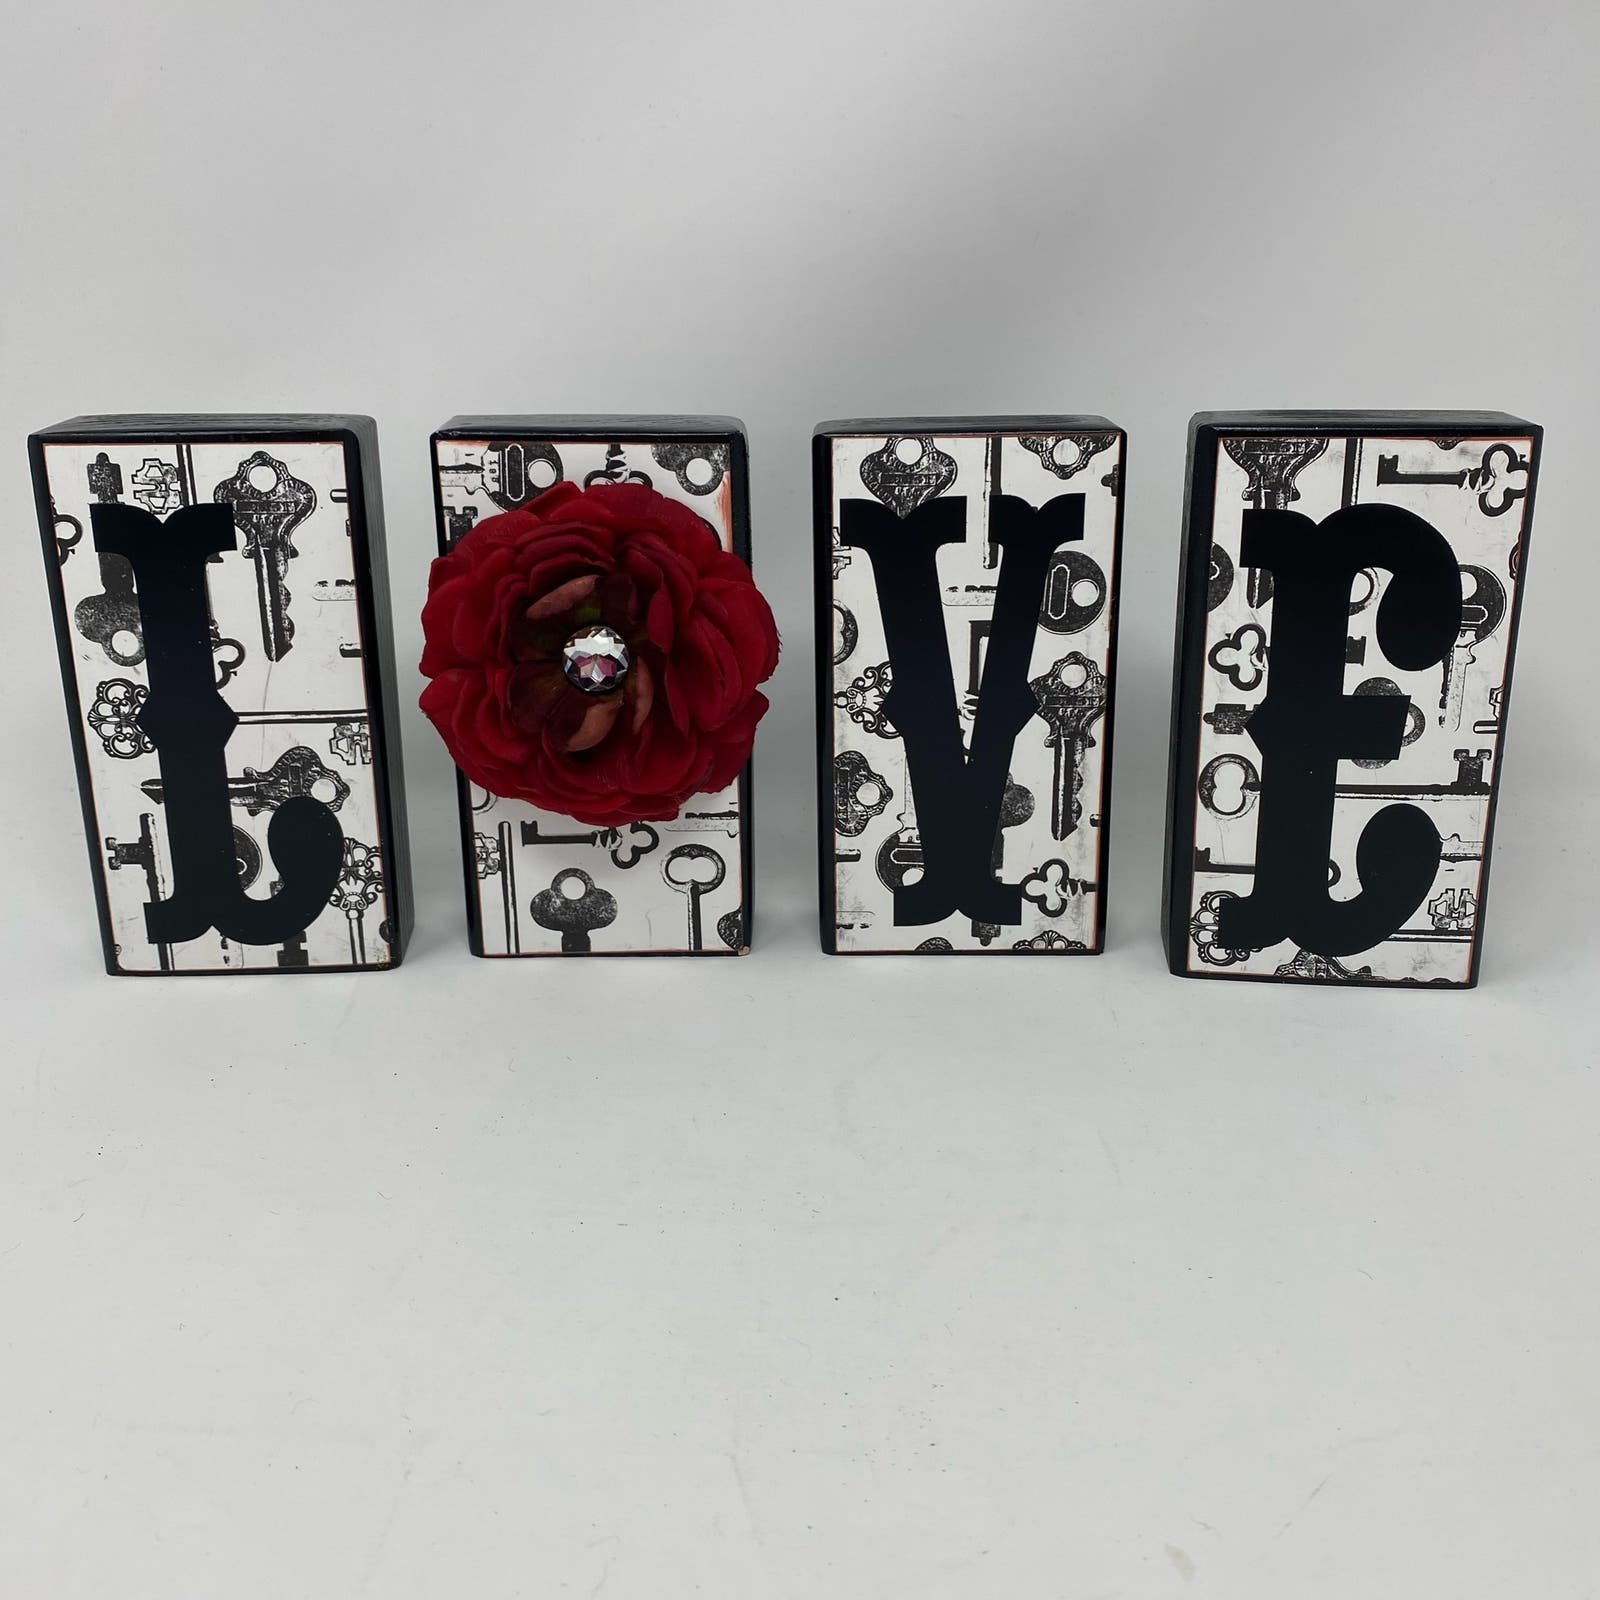 LOVE wood blocks with red flower Home Decor Valentines Day pL0SRtkFy